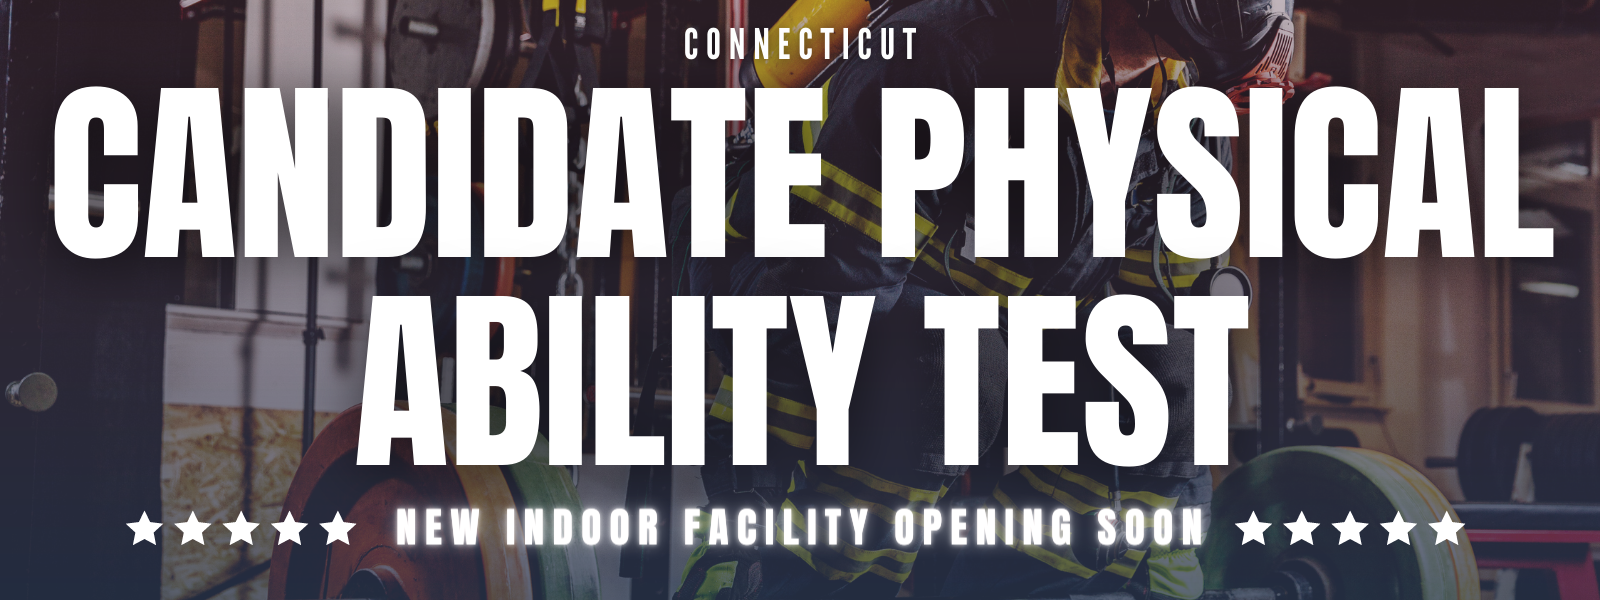 Candidate Physical Ability Test (CPAT) North Haven, CT Public Safety Jobs